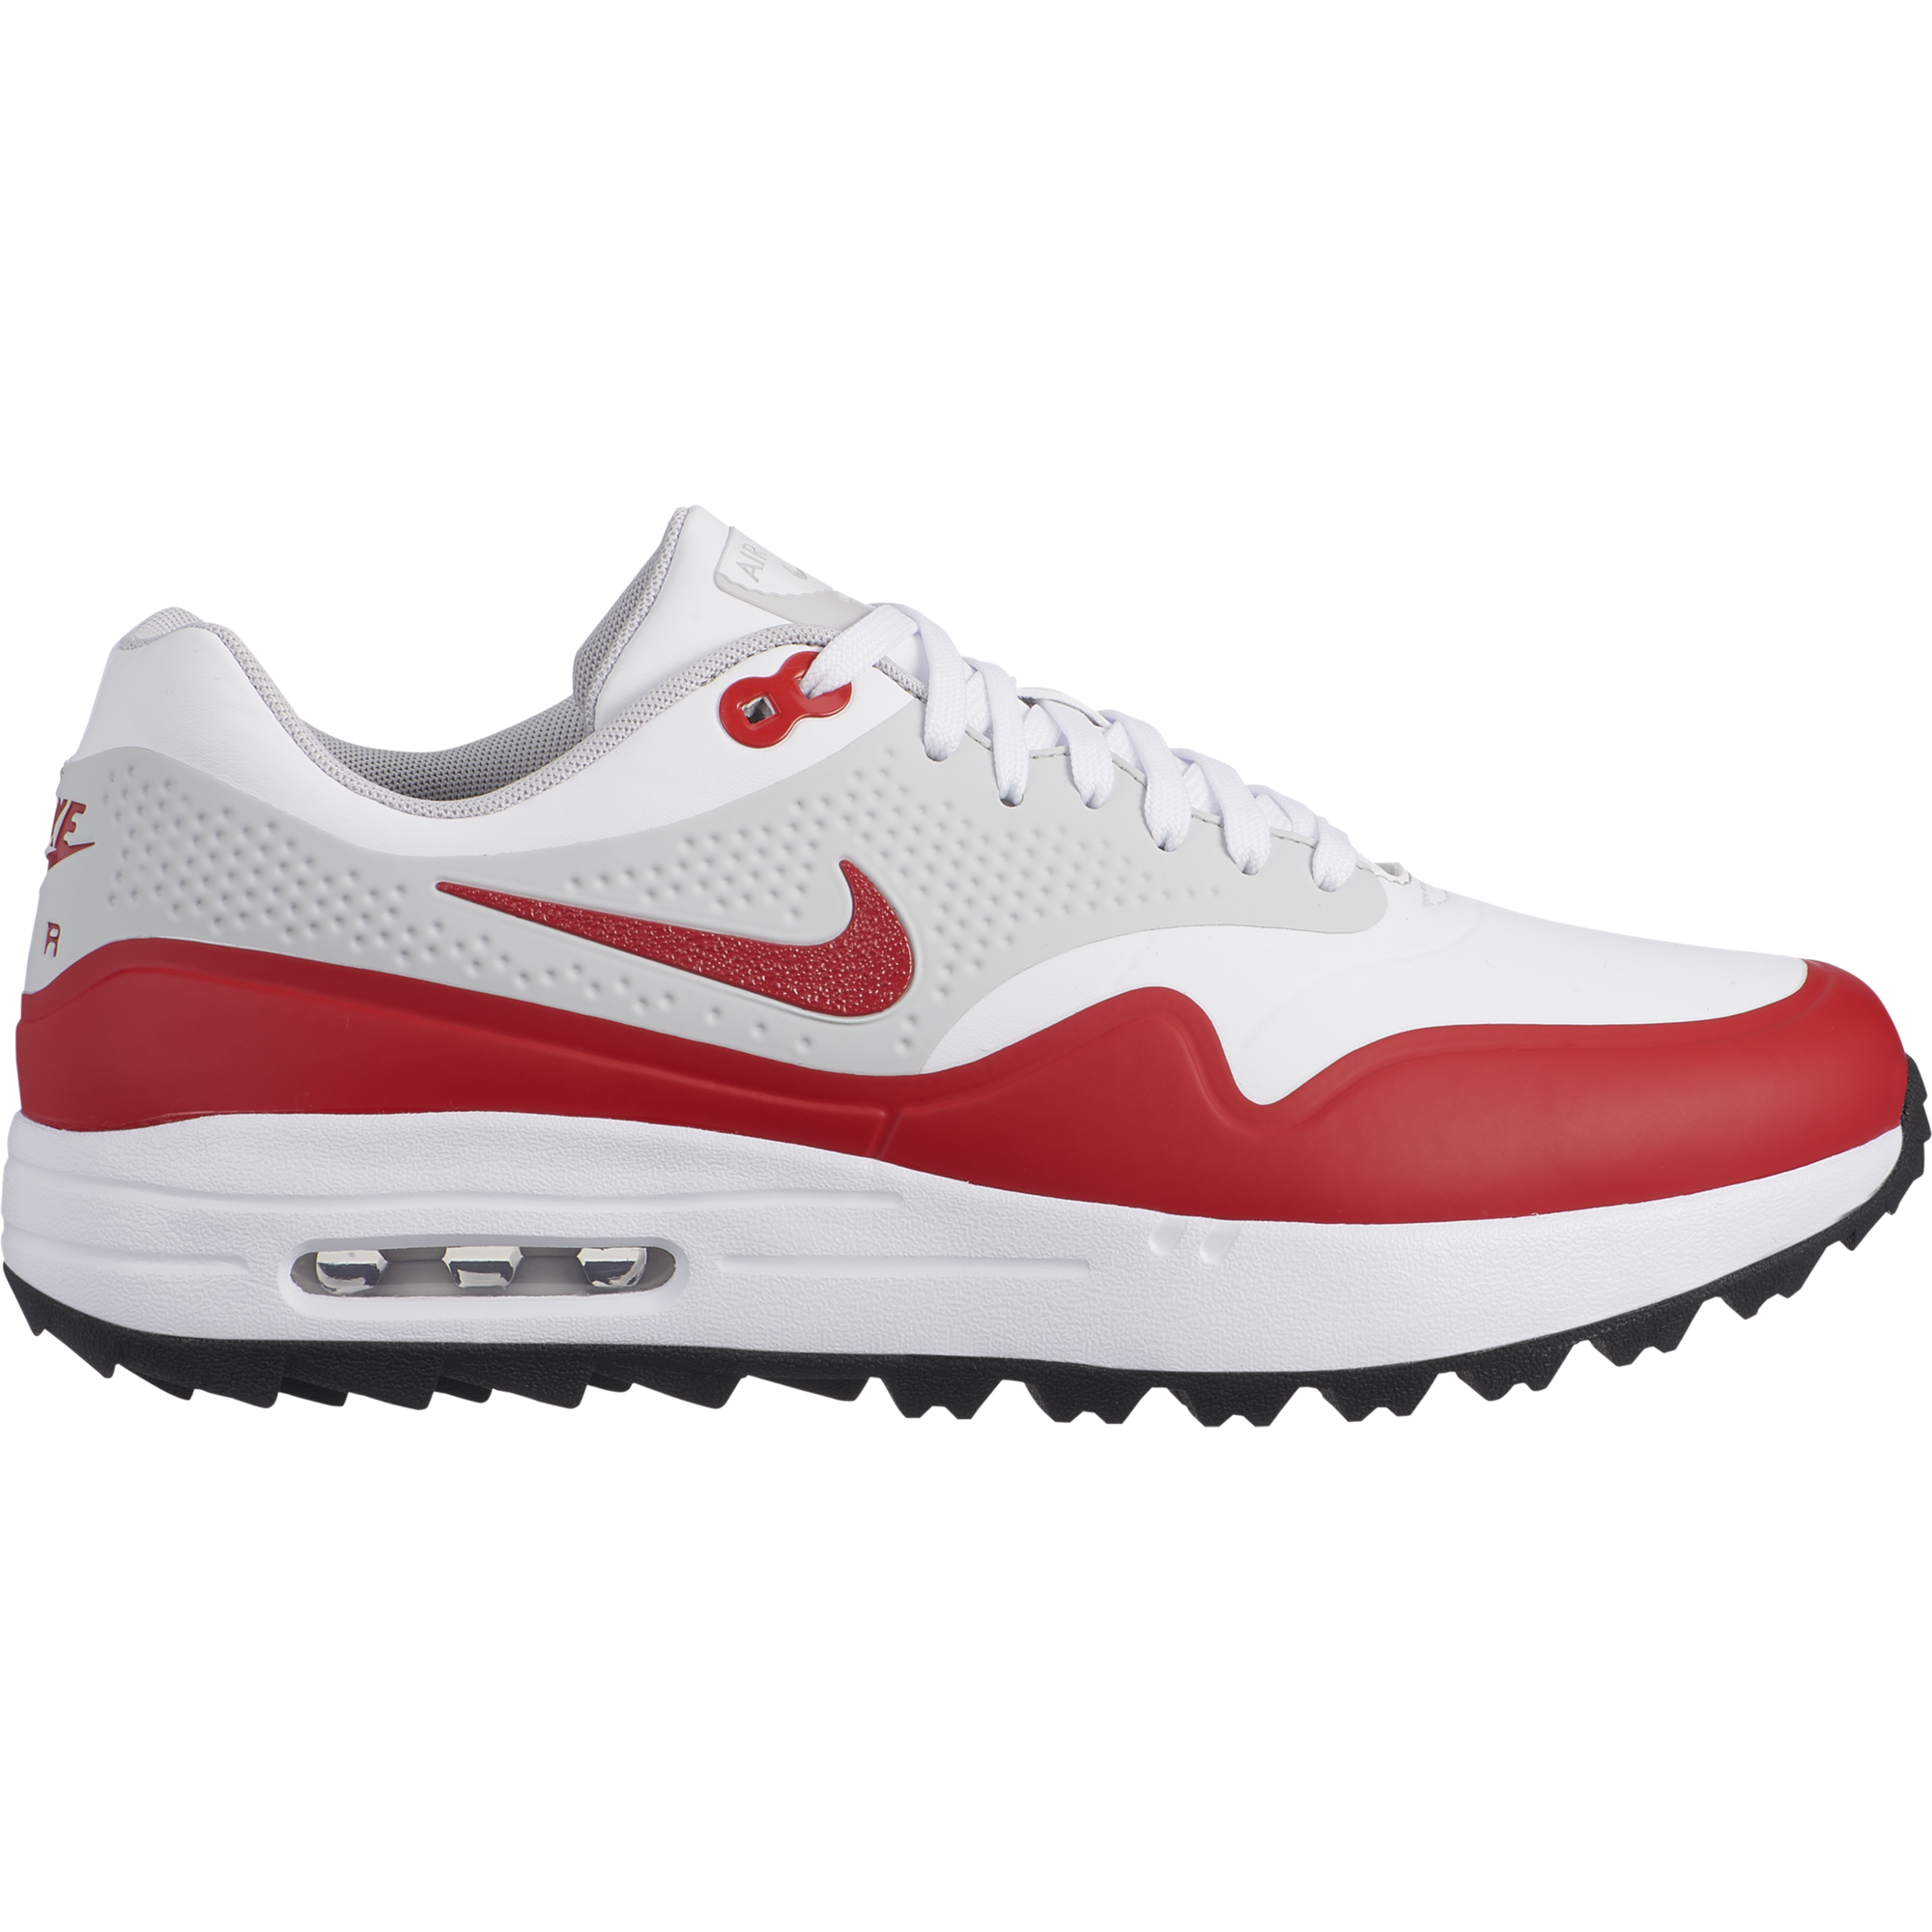 red g nikes